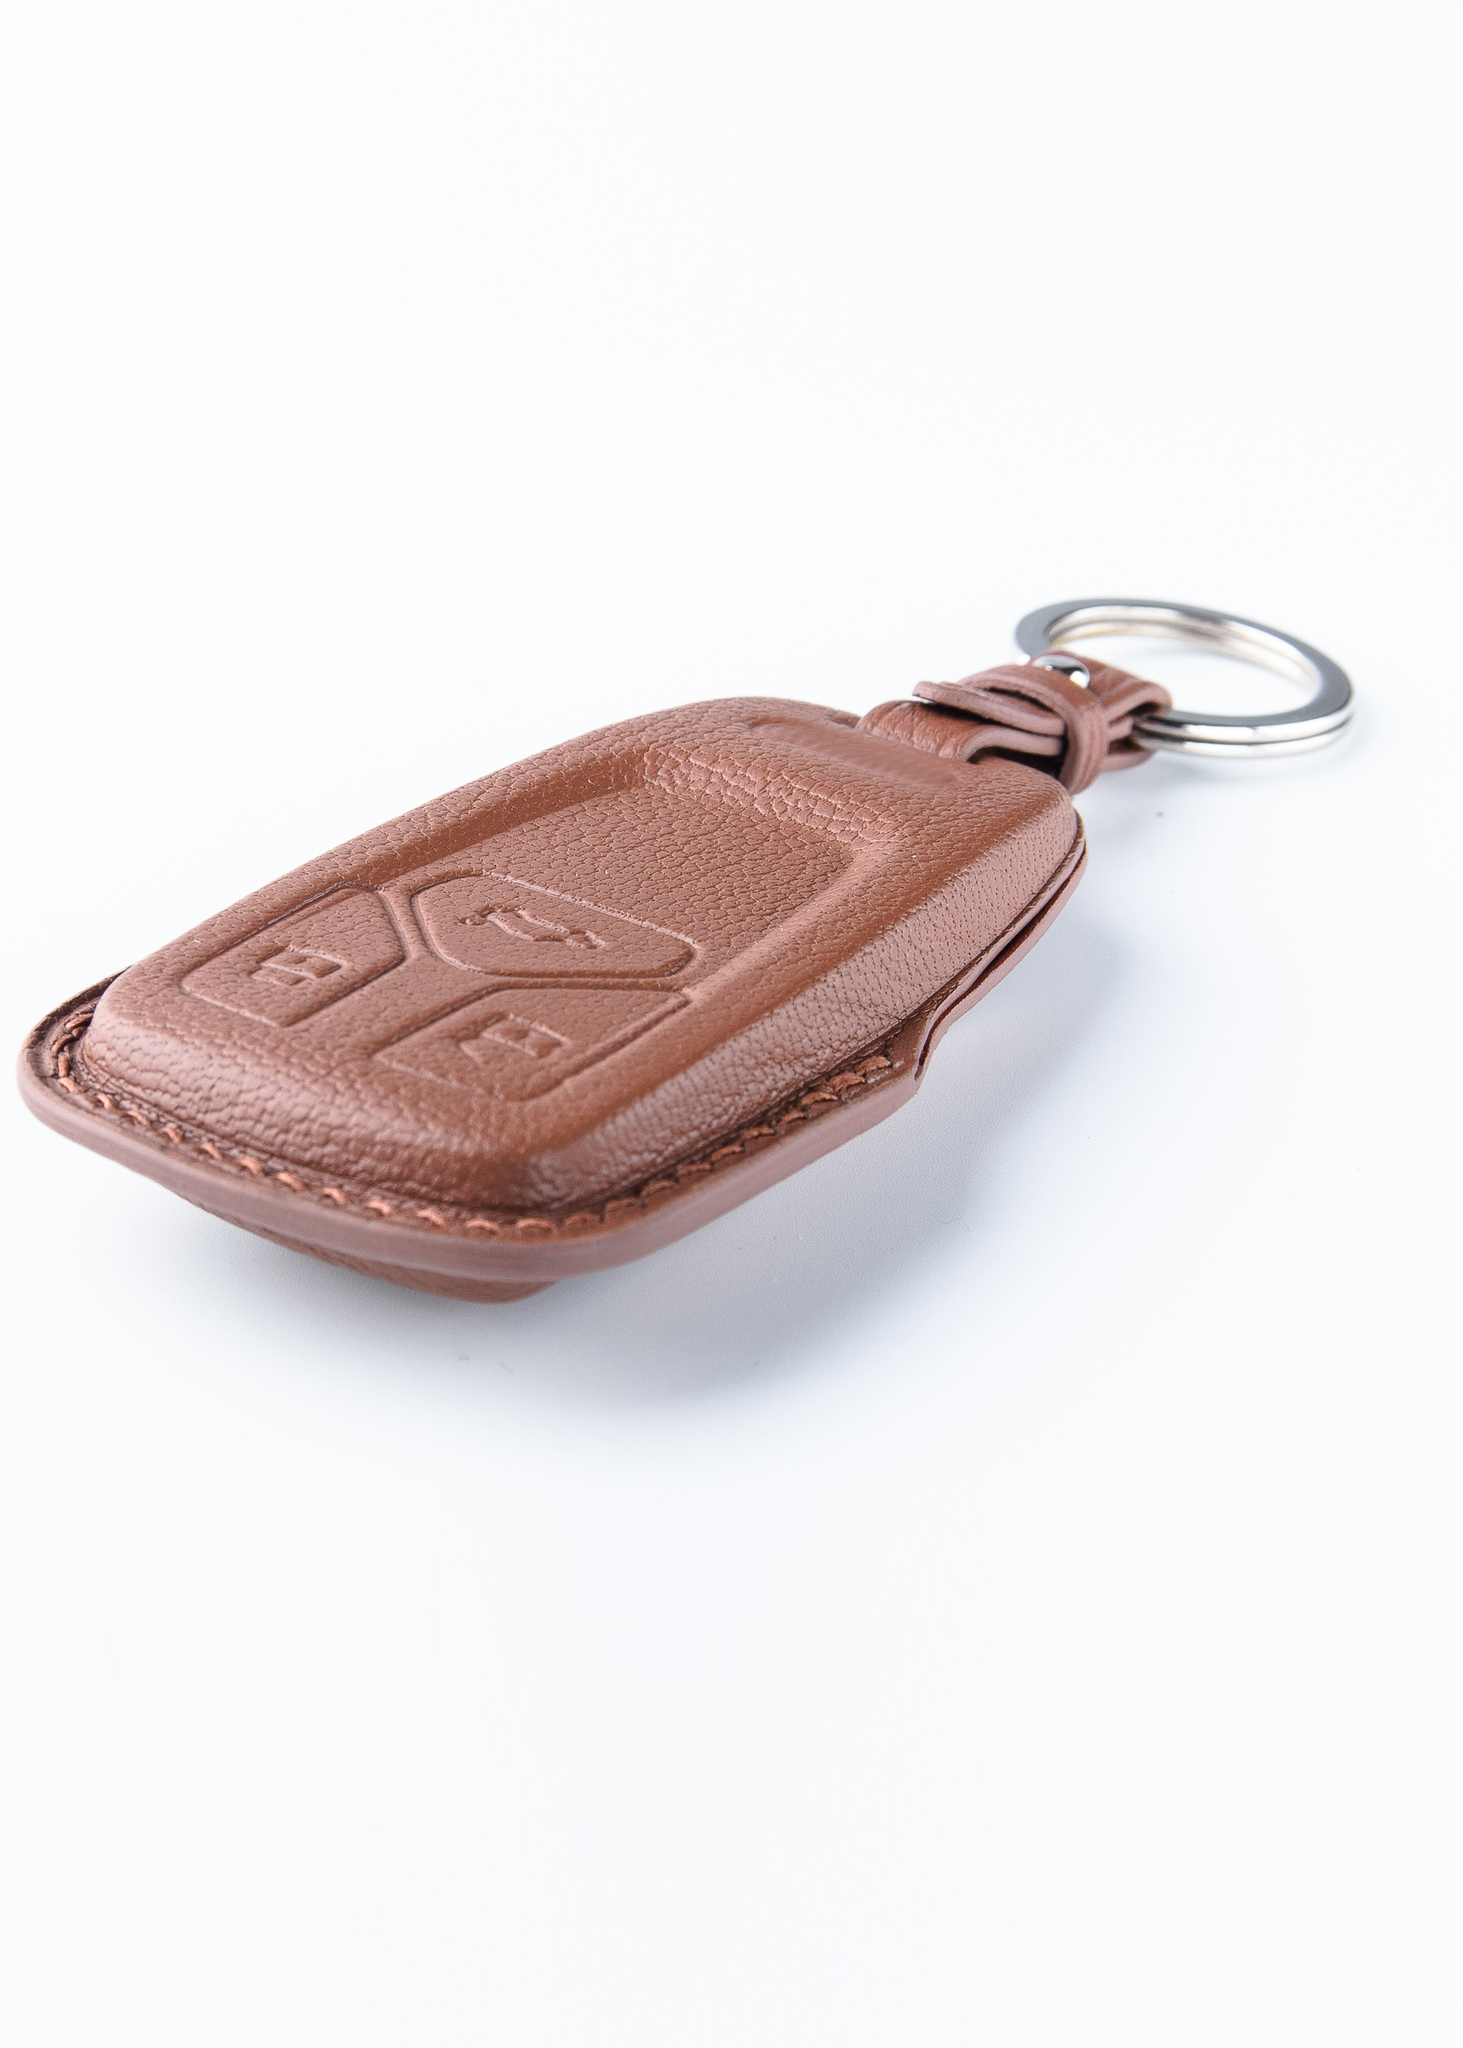 Timotheus for Audi key fob cover case, Compatible with Audi key case, Handmade Genuine Leather for Audi keychains | AU11